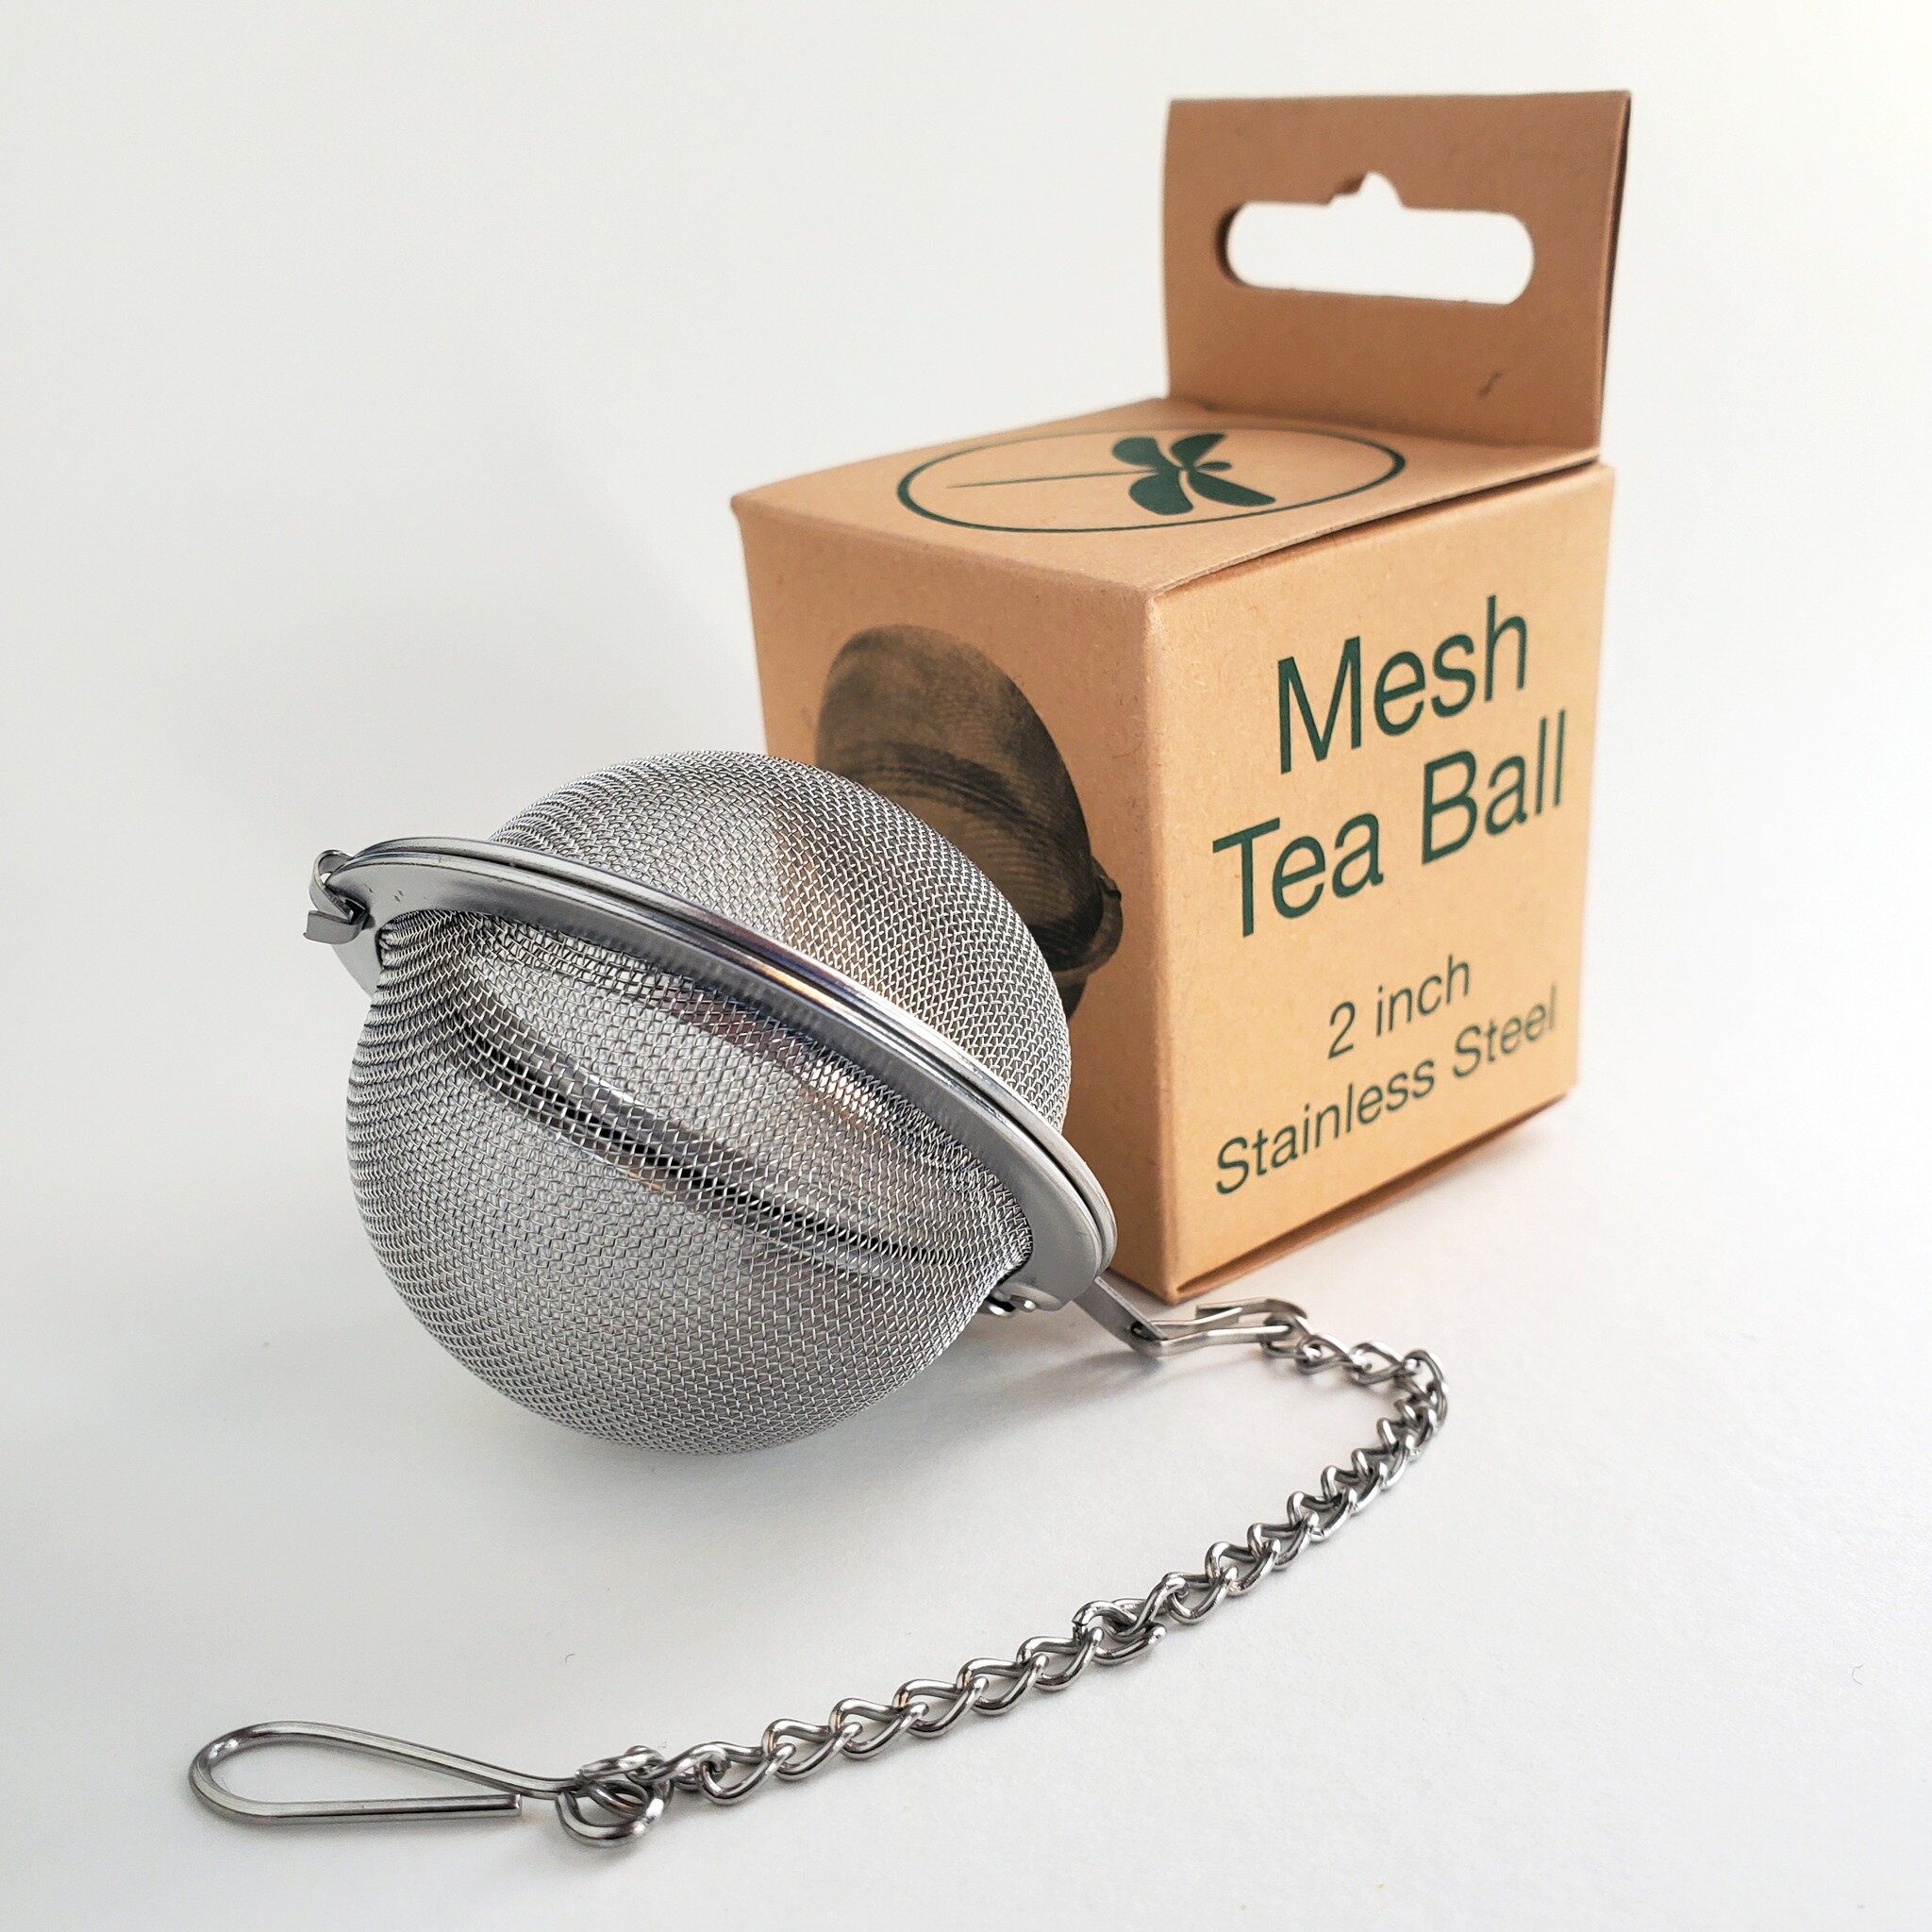 Need last-minute stocking stuffers for the tea lover in your life? We've got you covered!

In the Shop you'll find reusable Mesh Tea Balls and reusable Muslin Sachets. Get them before Christmas by ordering today.

Thoughtful, sustainable, convenient 